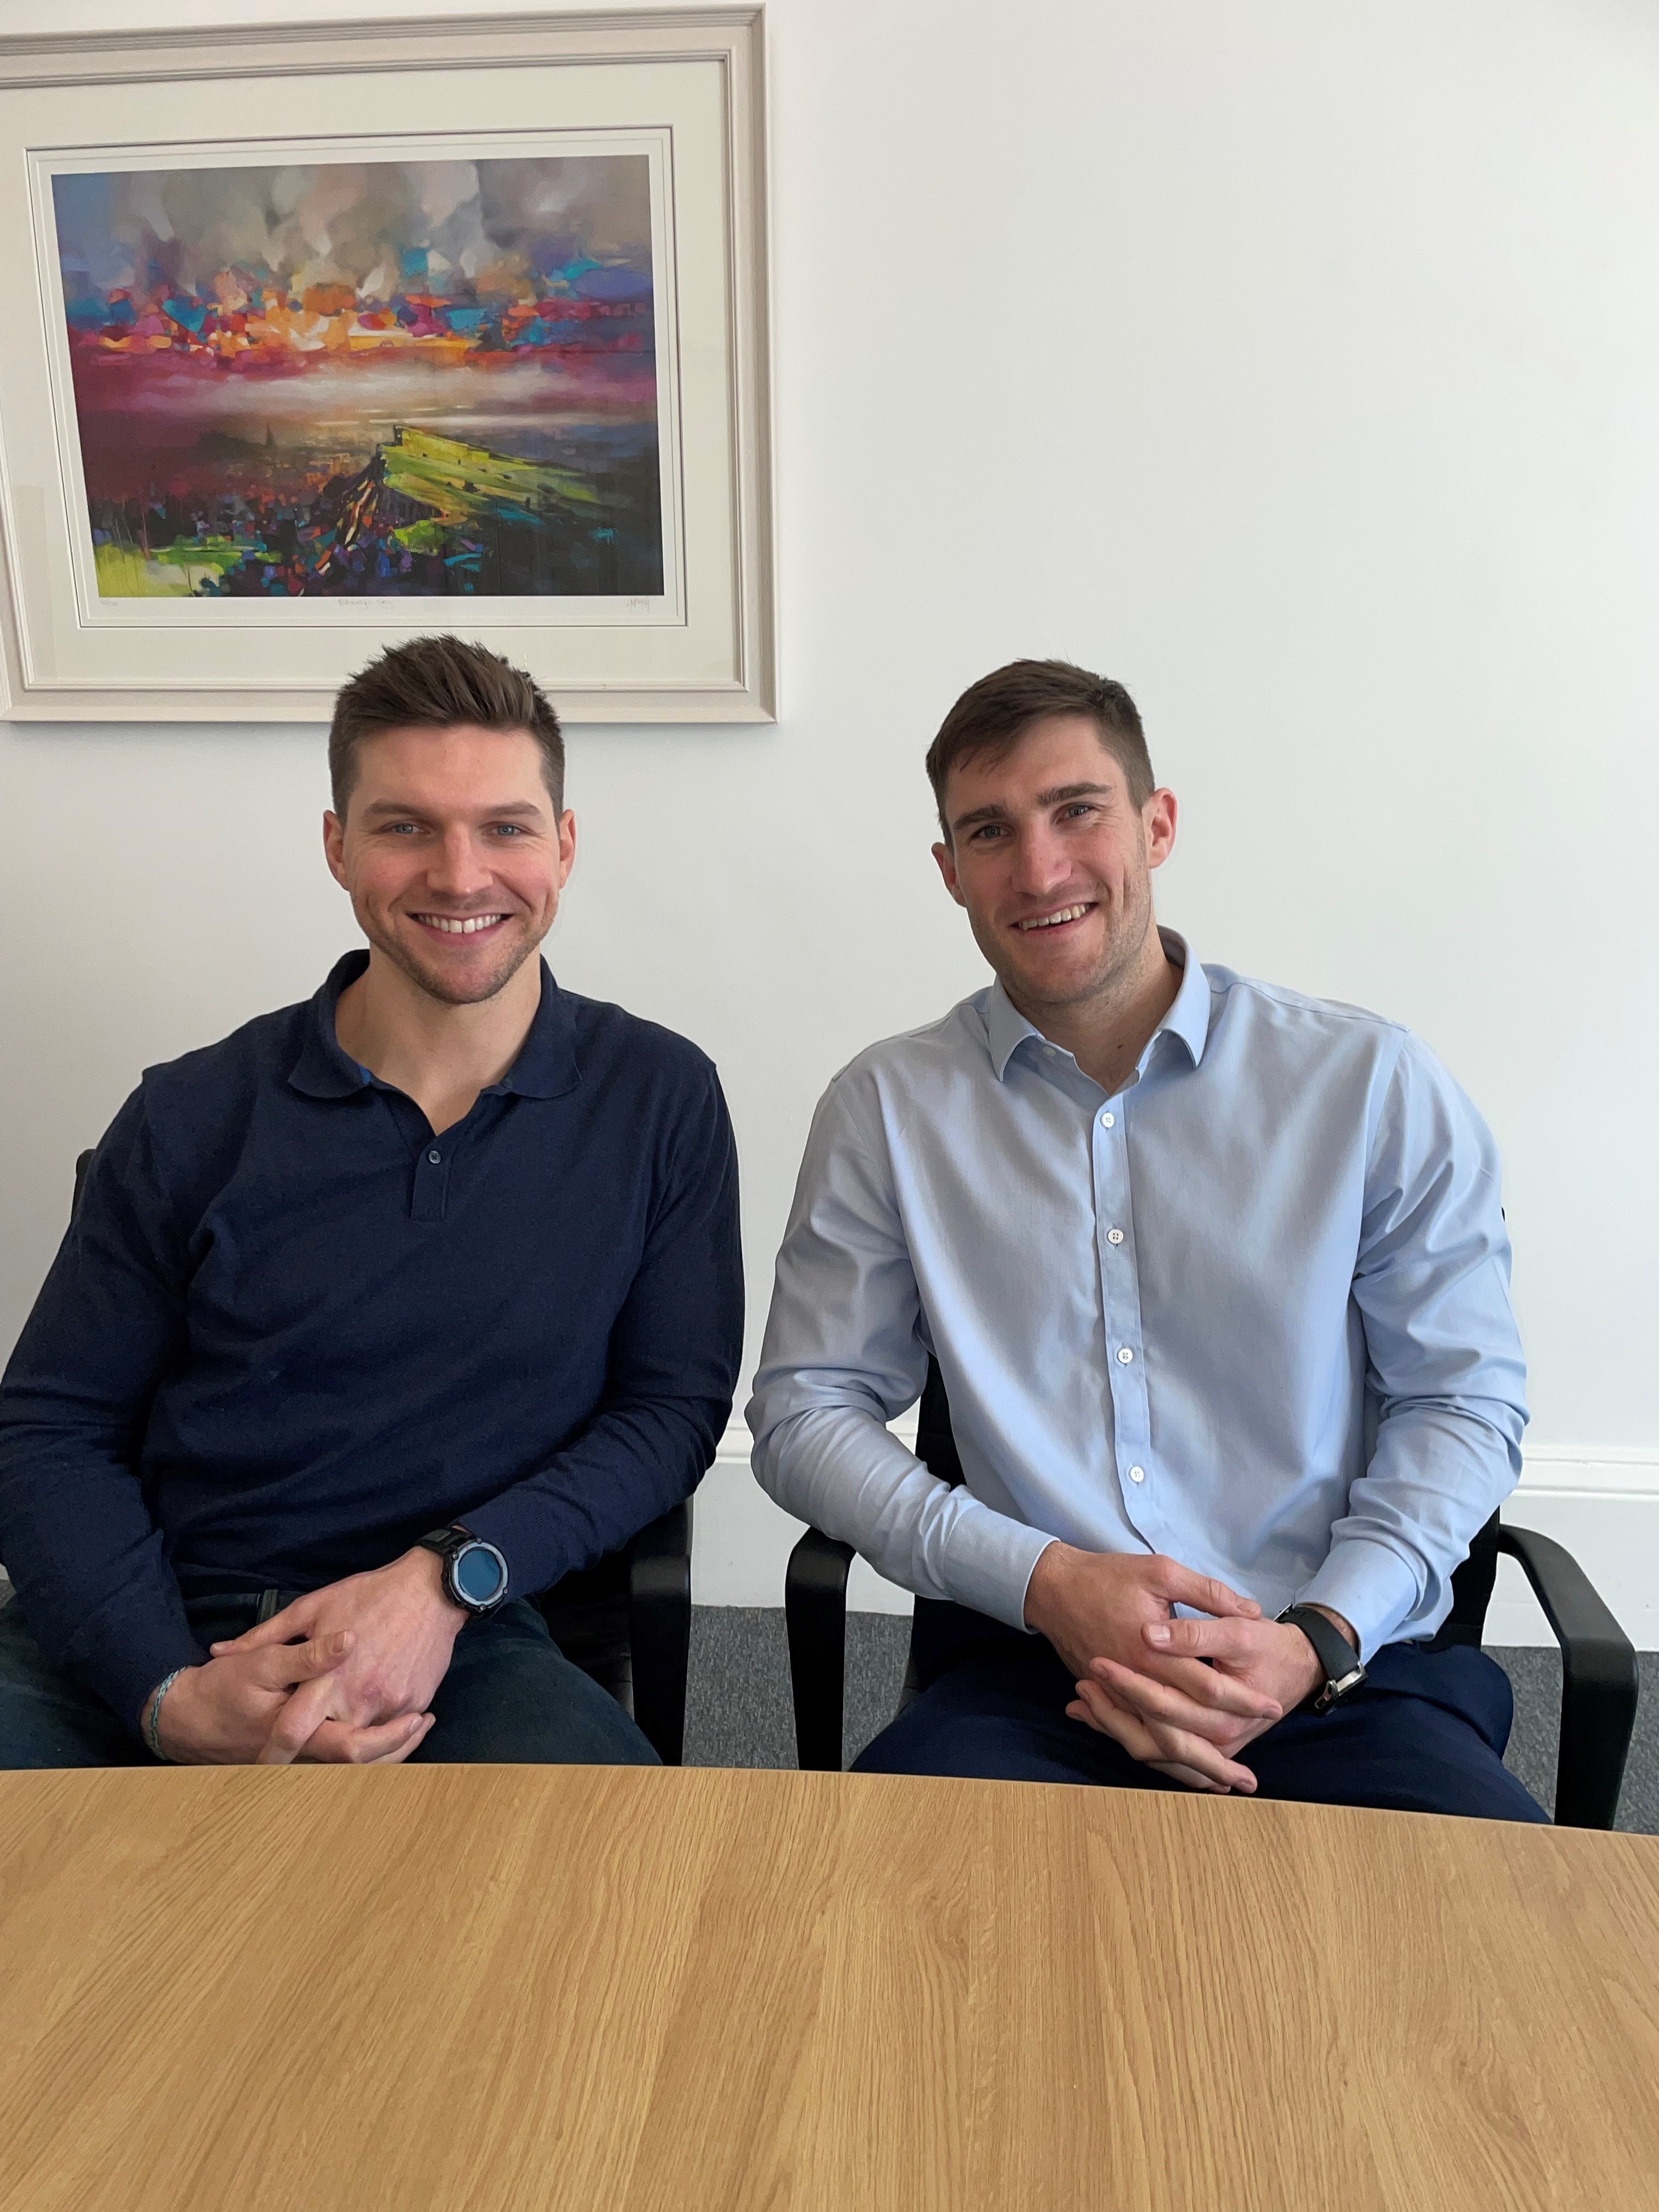 Tweed Wealth Management's new recruitment strategy sees former rugby stars trained as financial planners